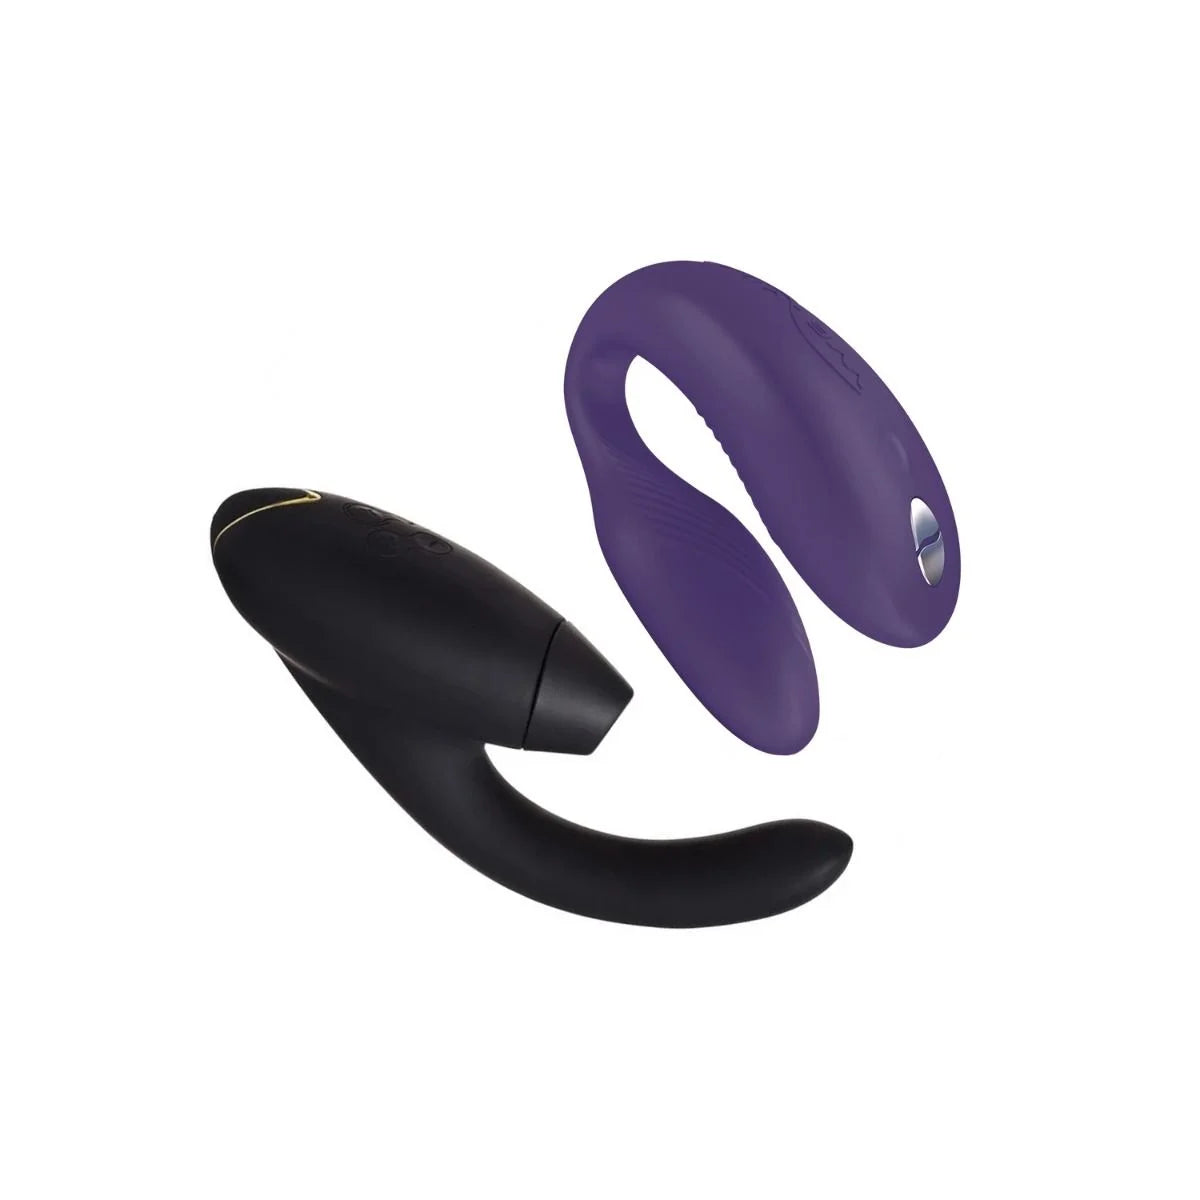 The We-Vibe Womanizer